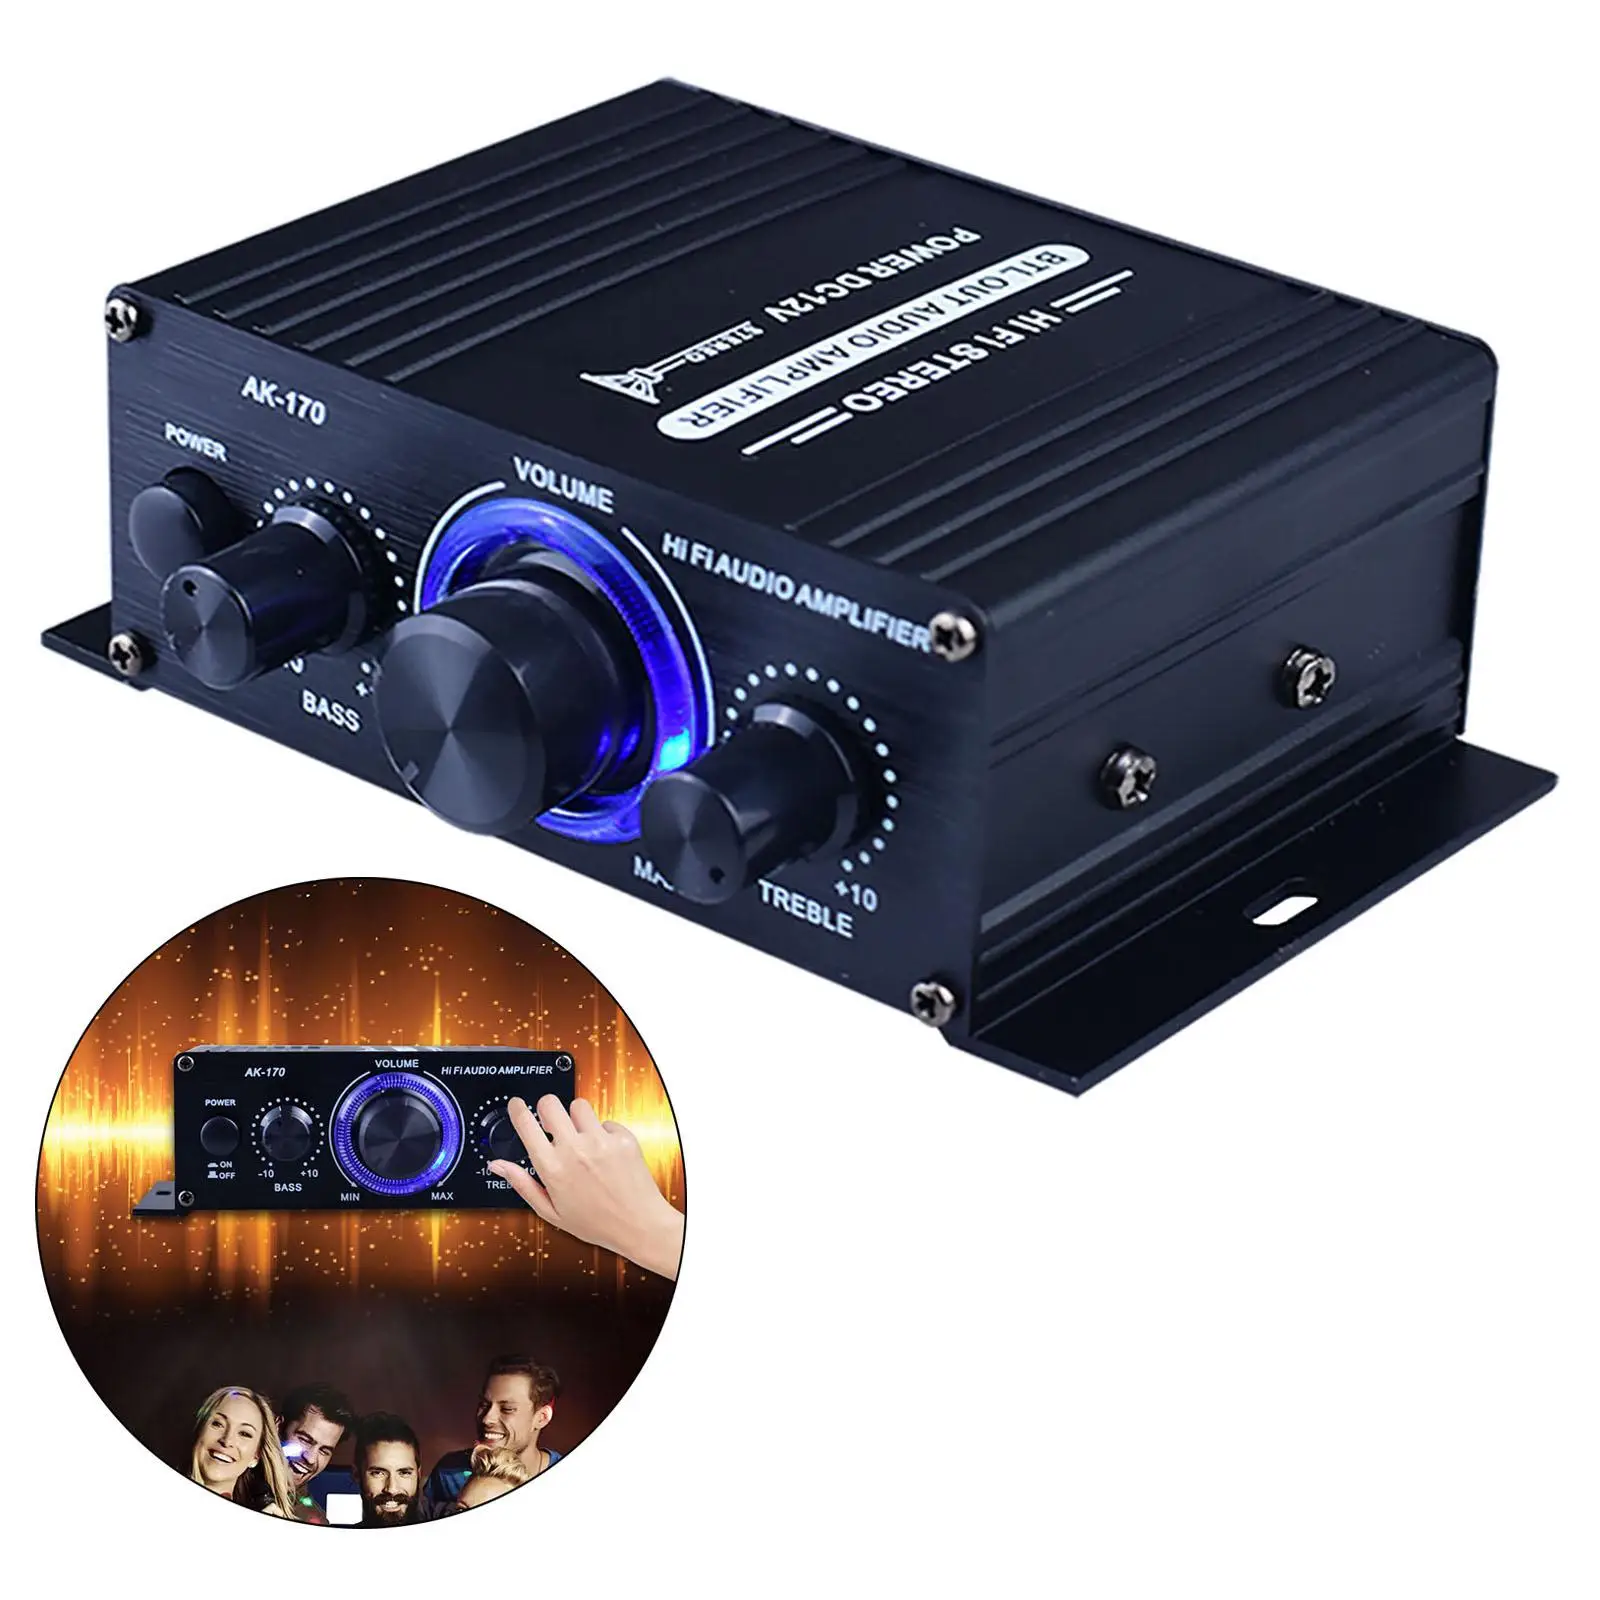 HiFi Audio Power Amplifier 20W+20W Stereo Receiver Amp for Home Audio System